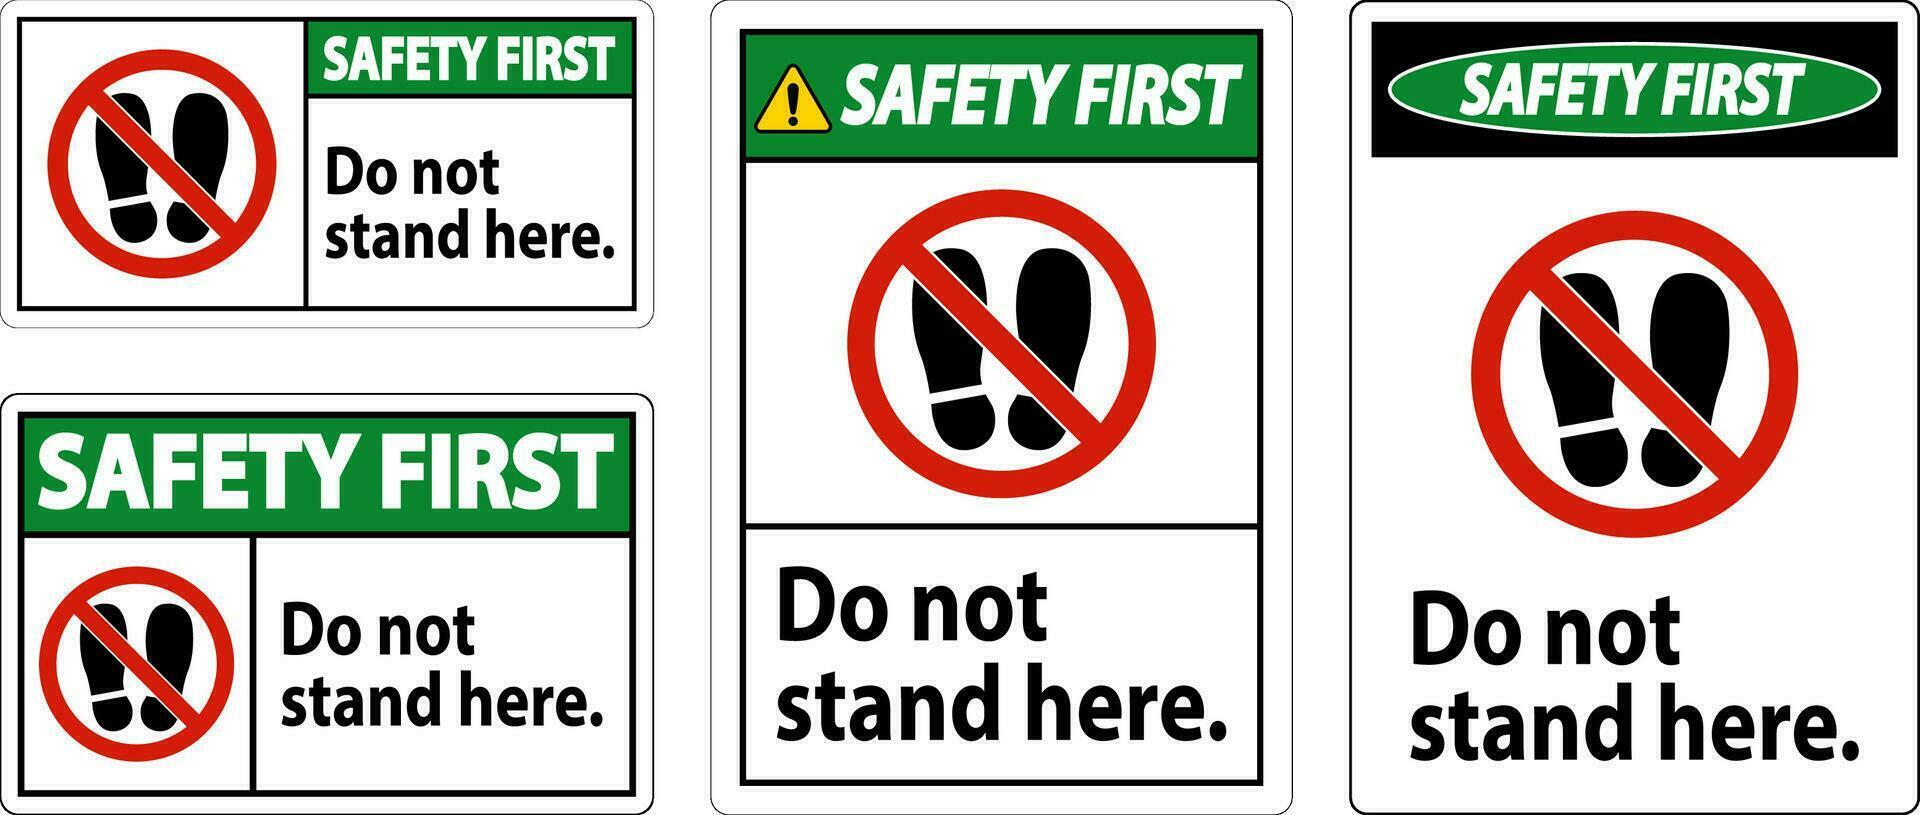 Safety First Sign Do Not Stand Here On White Background vector